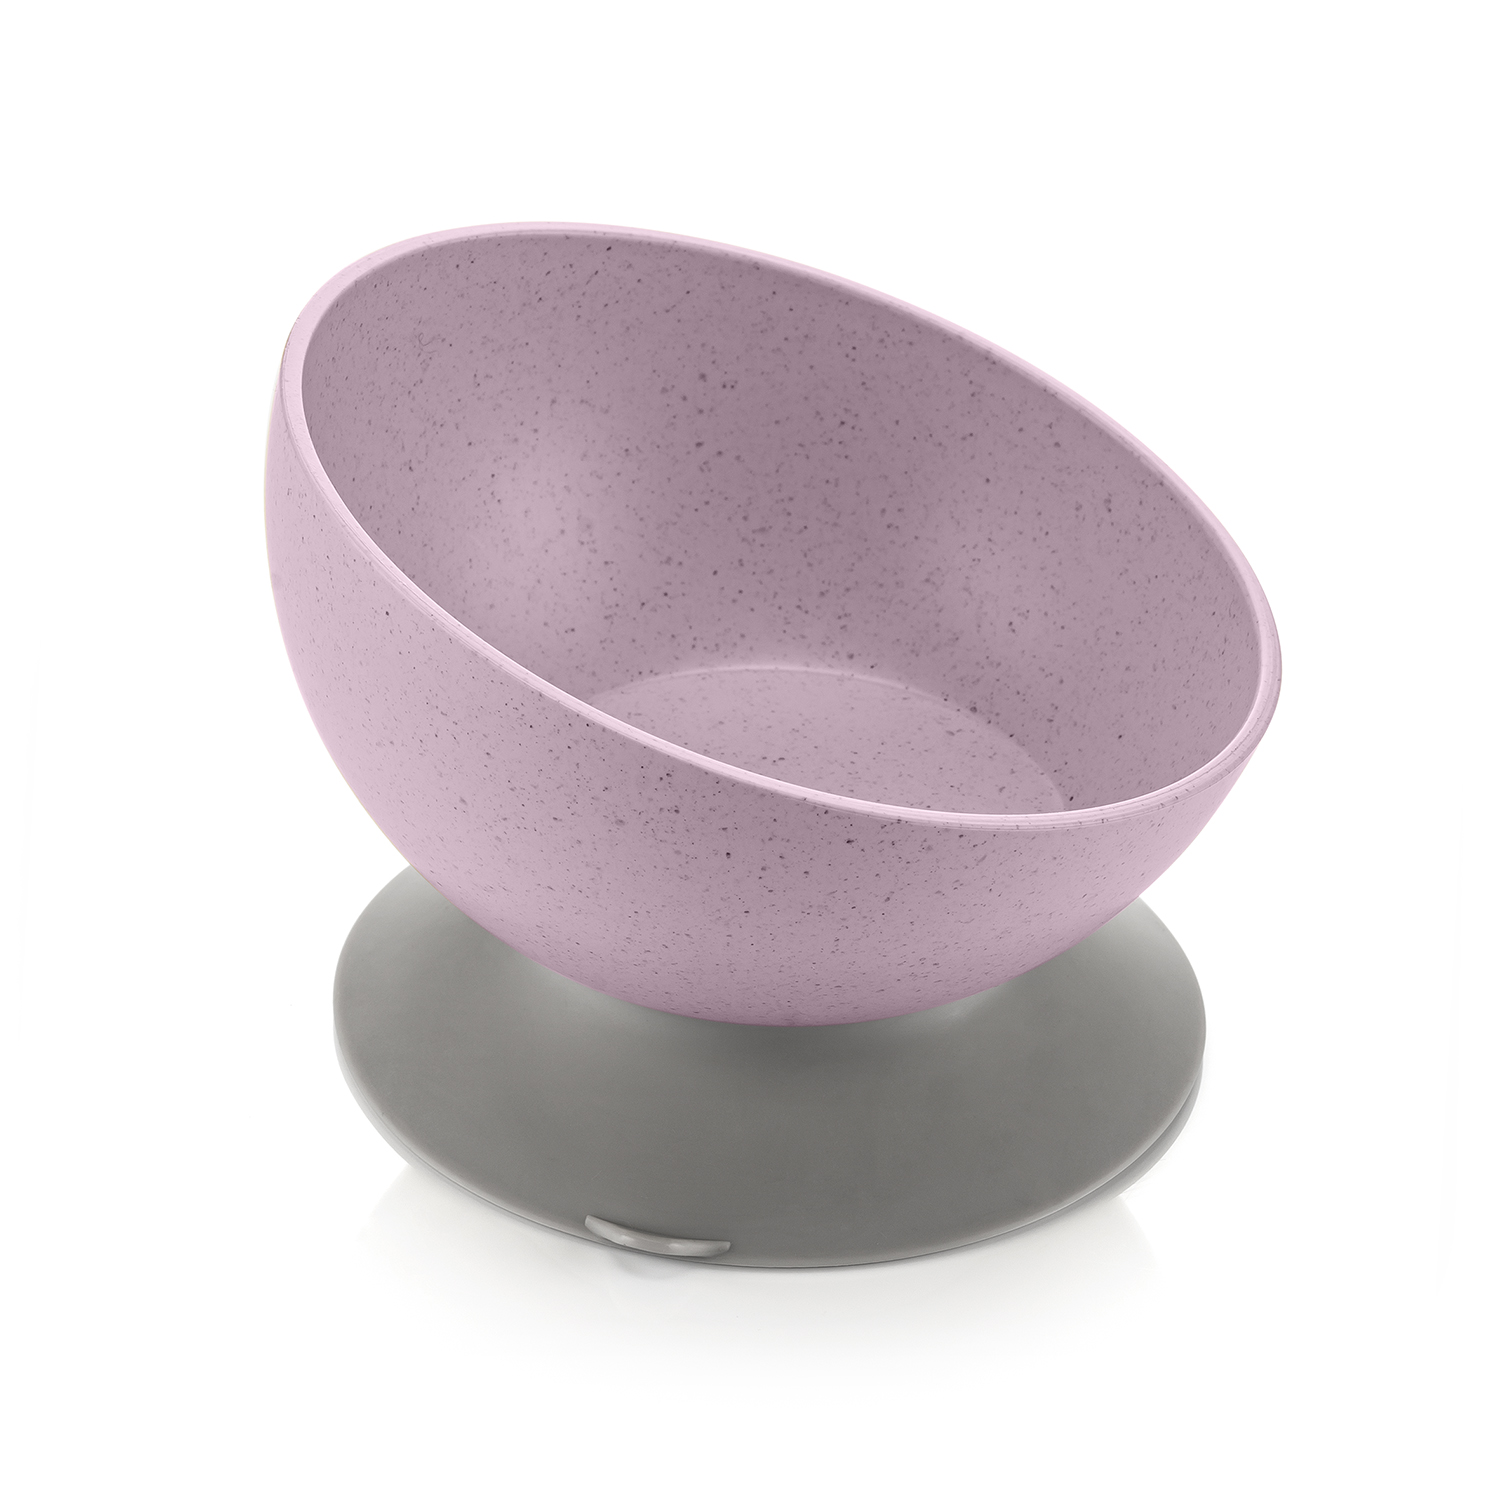 Growing Learning bowl with suction cup, pink